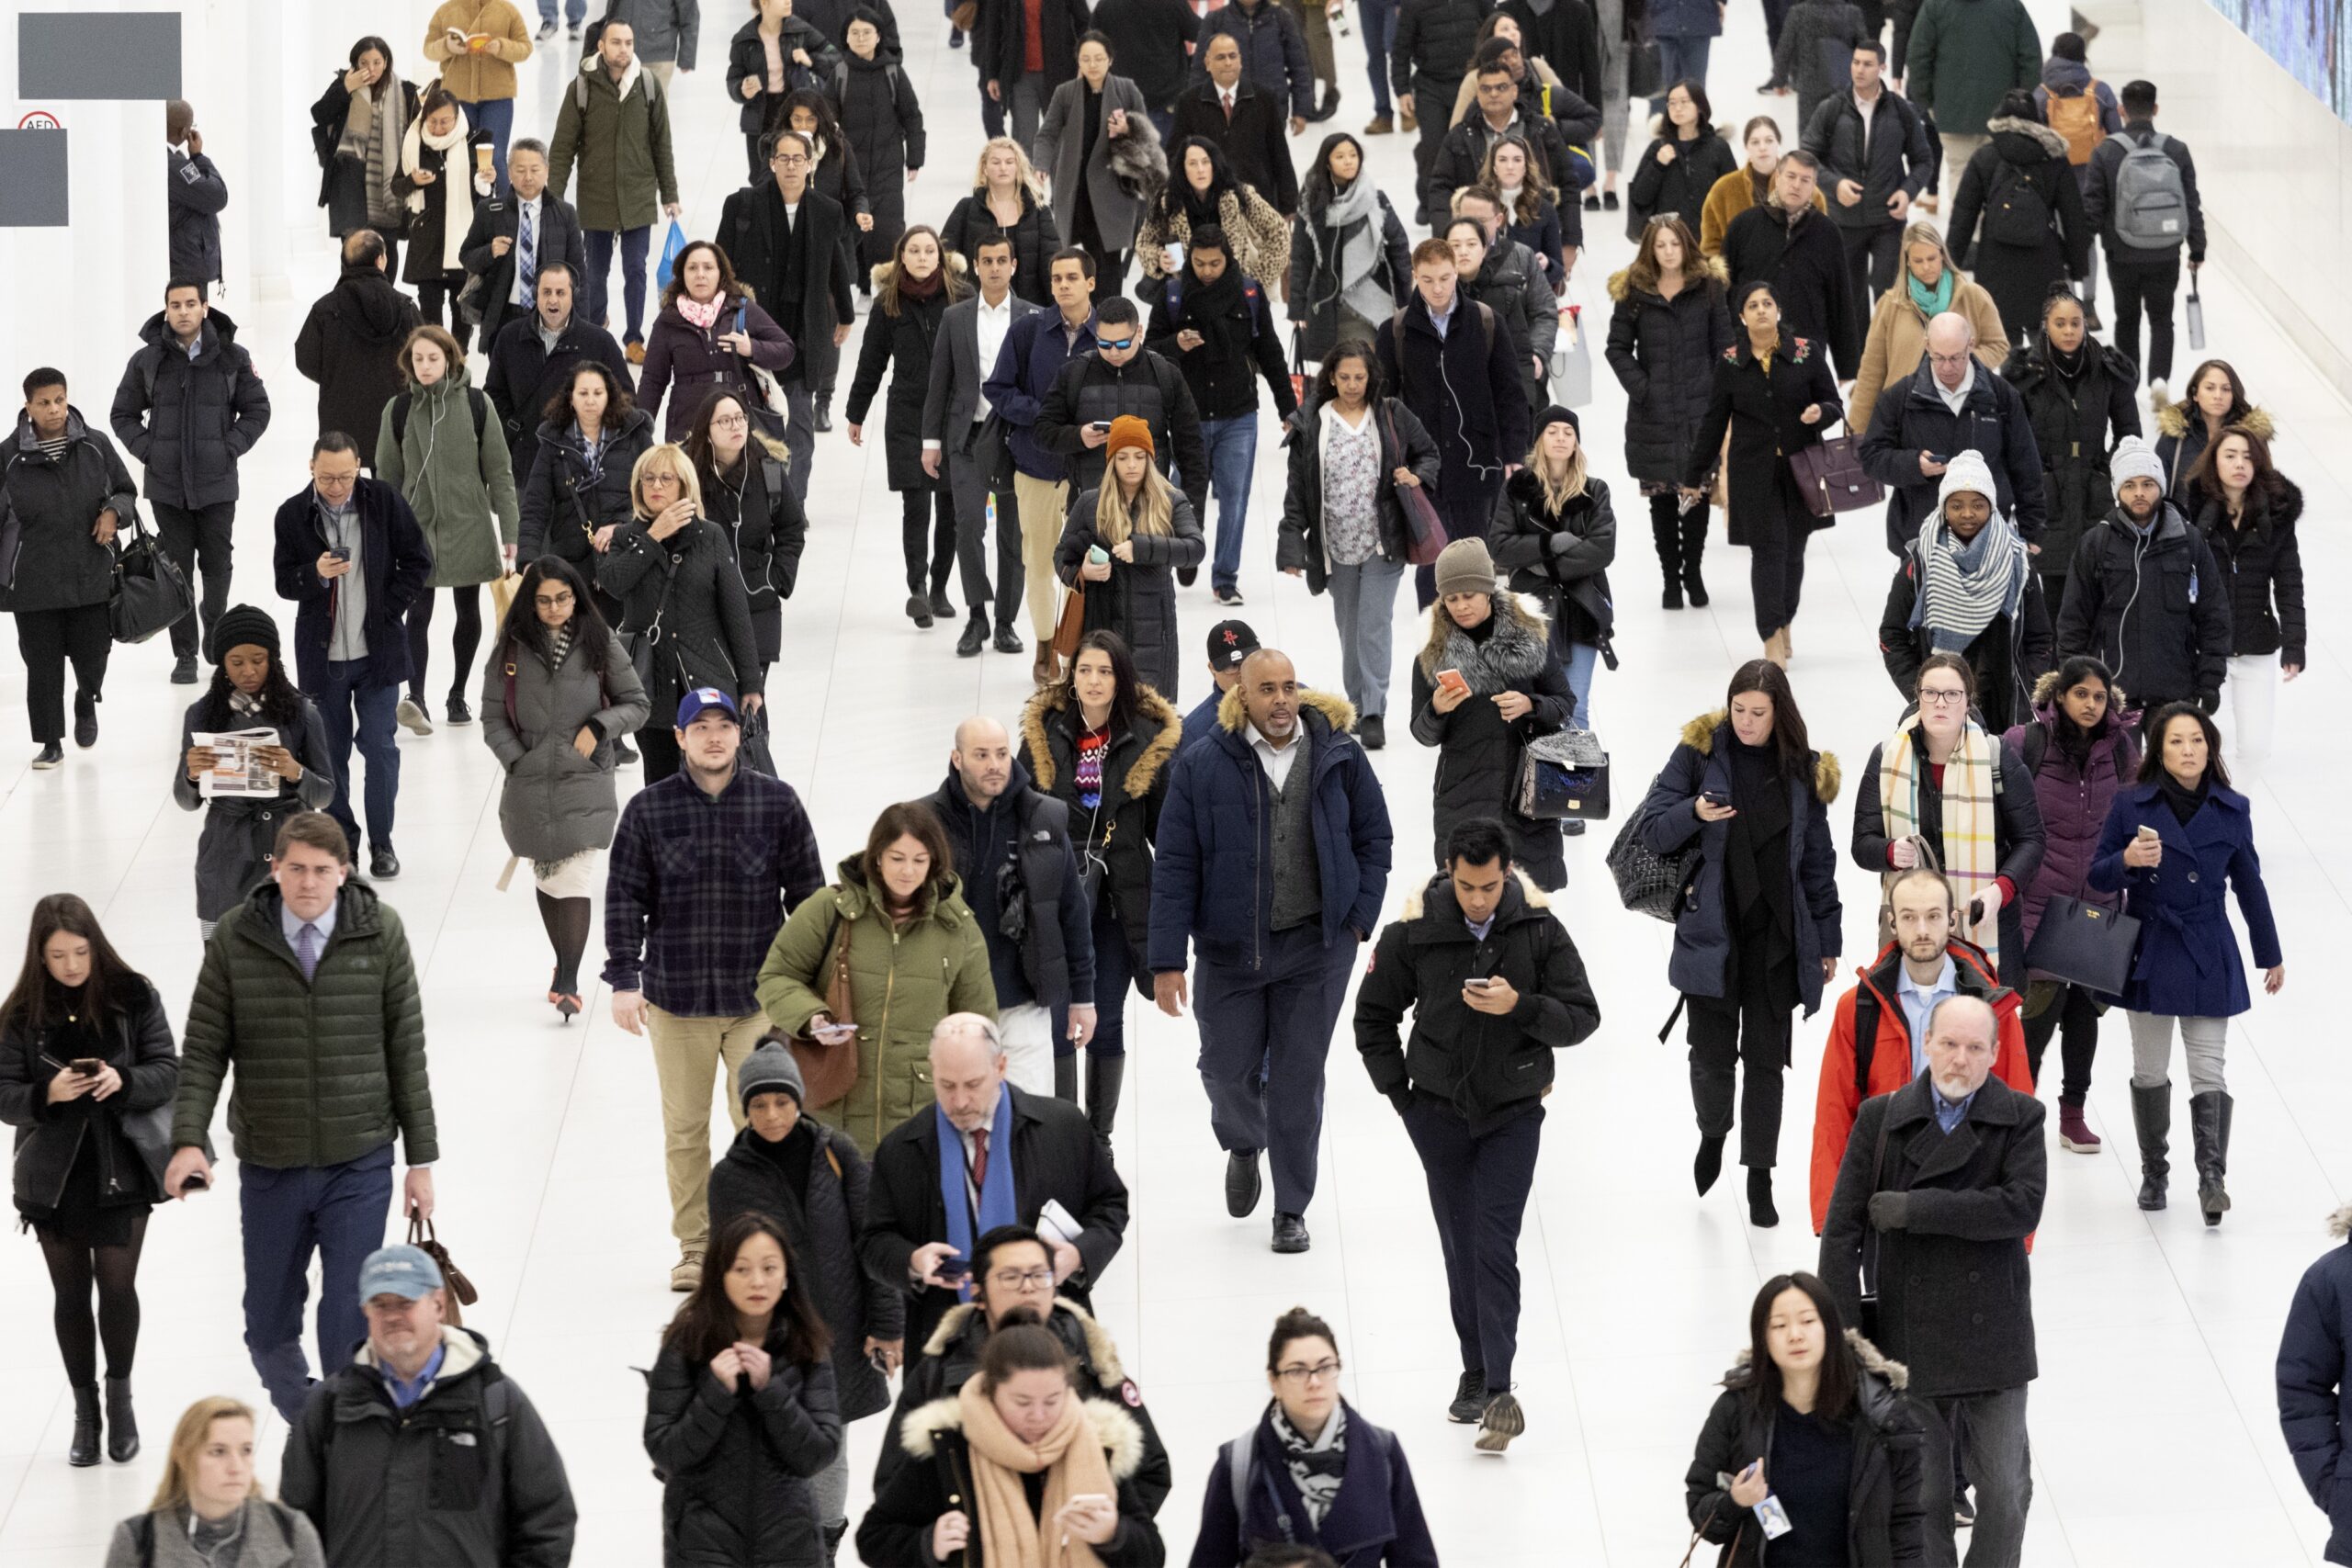 Commuters pass through the World Trade Center, Wednesday, Dec. 4, 2019 in New York